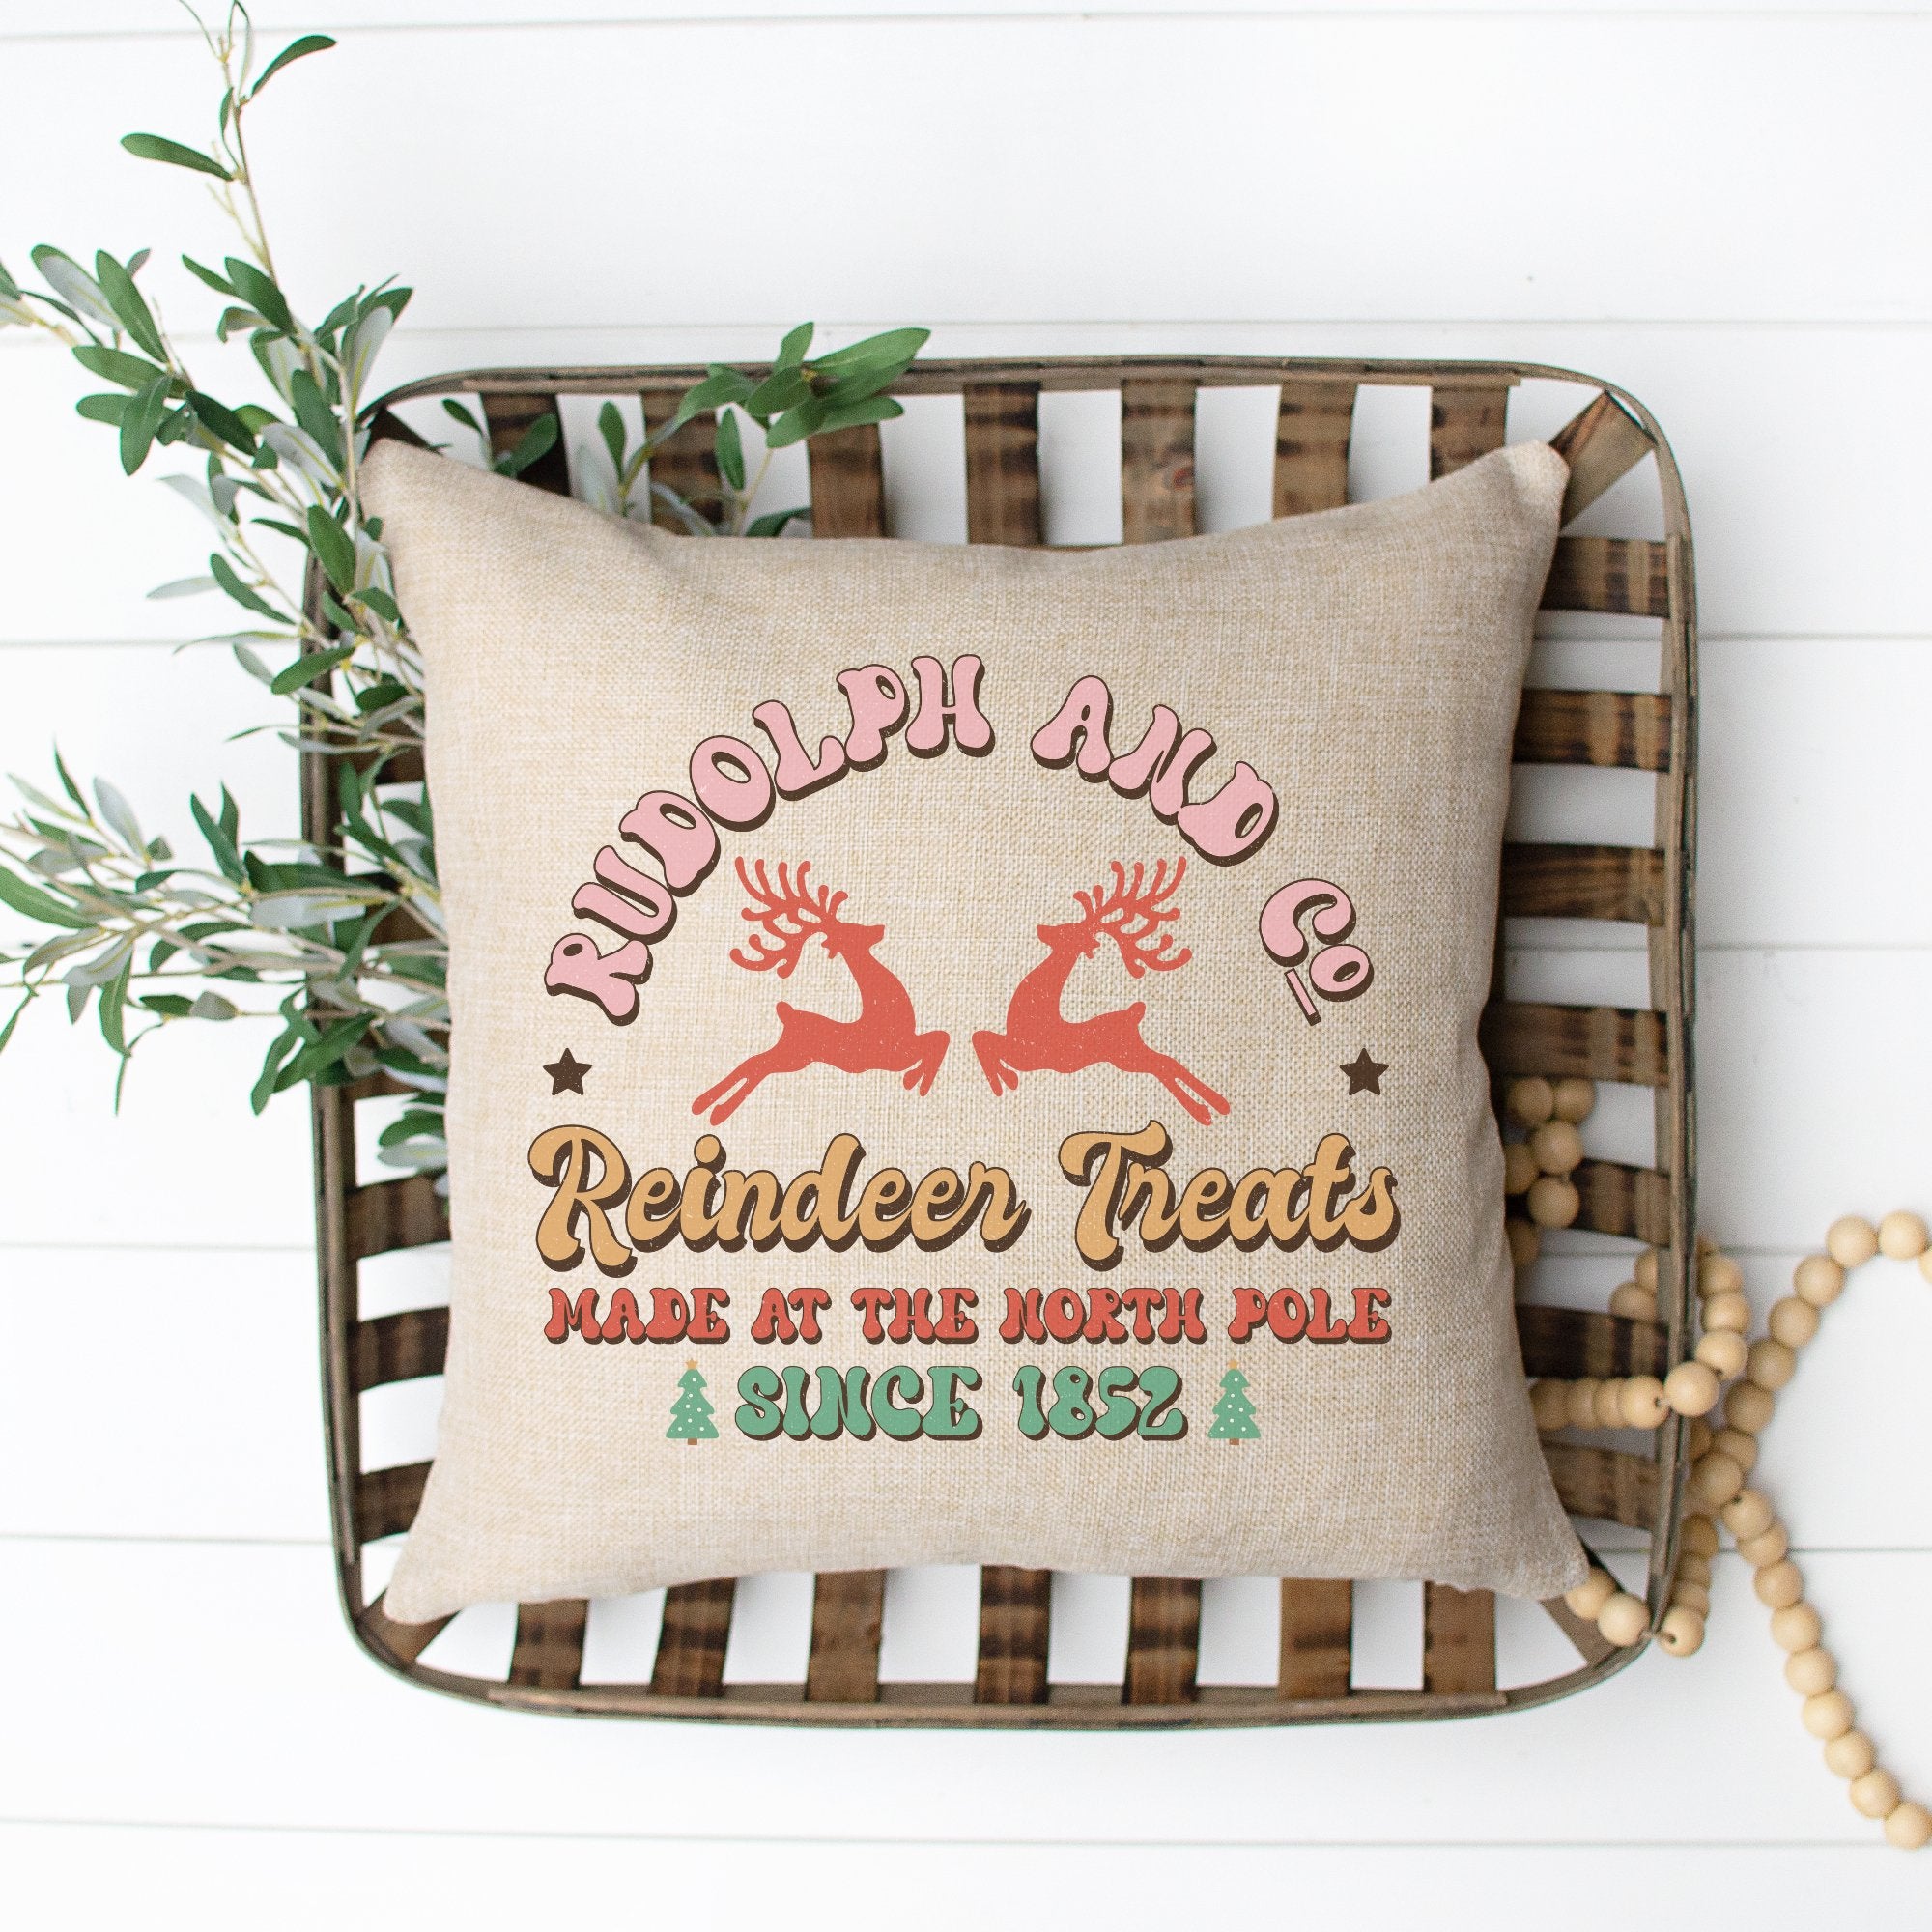 Rudolph and Co. Christmas Pillow Cover - Trendznmore